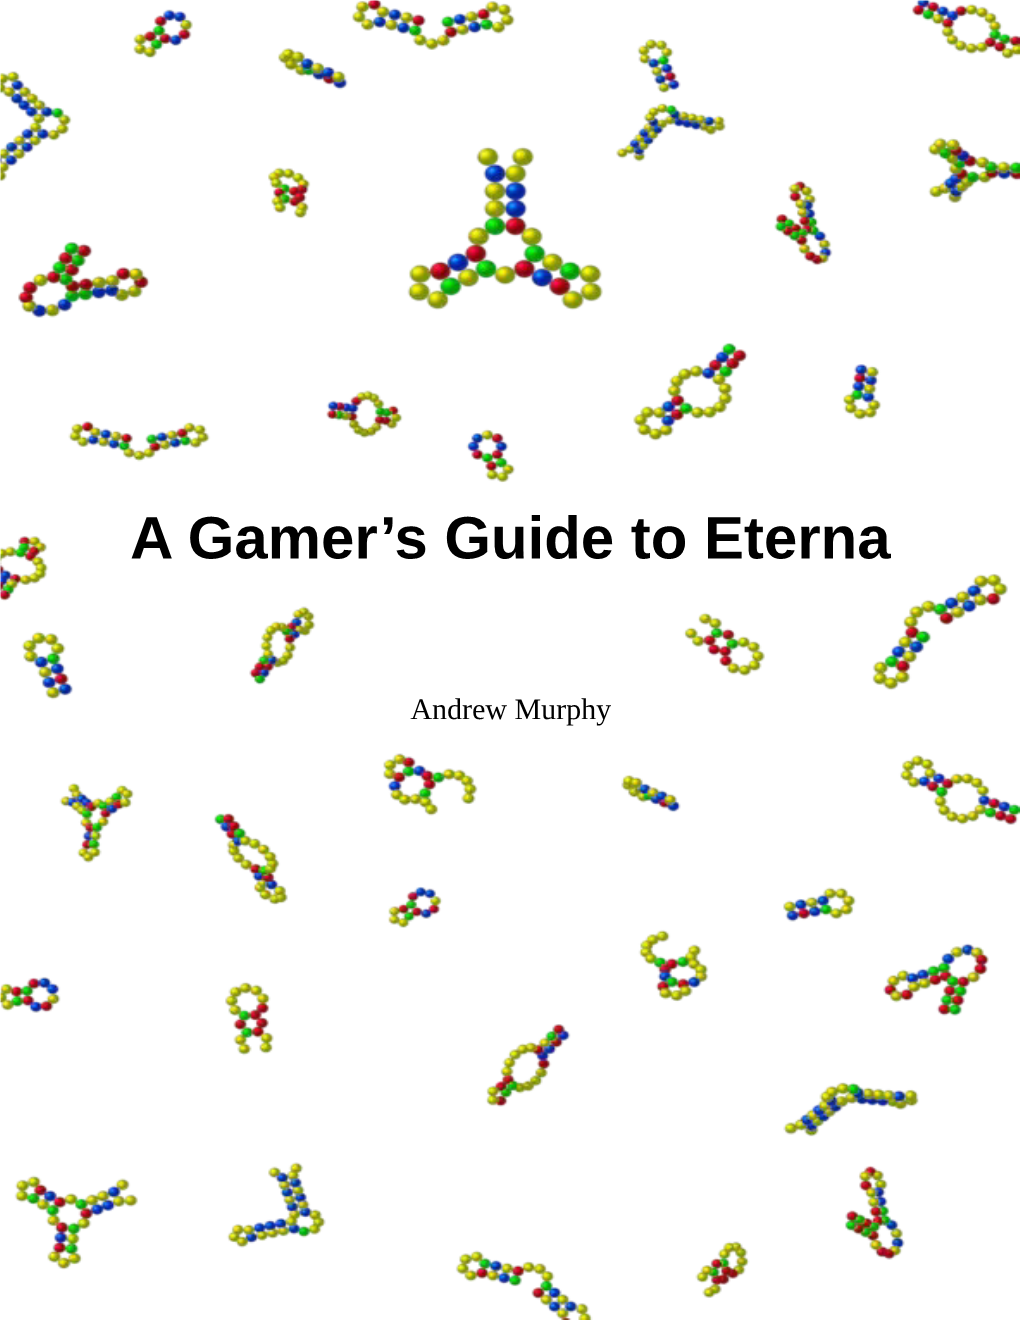 A Gamer's Guide to Eterna